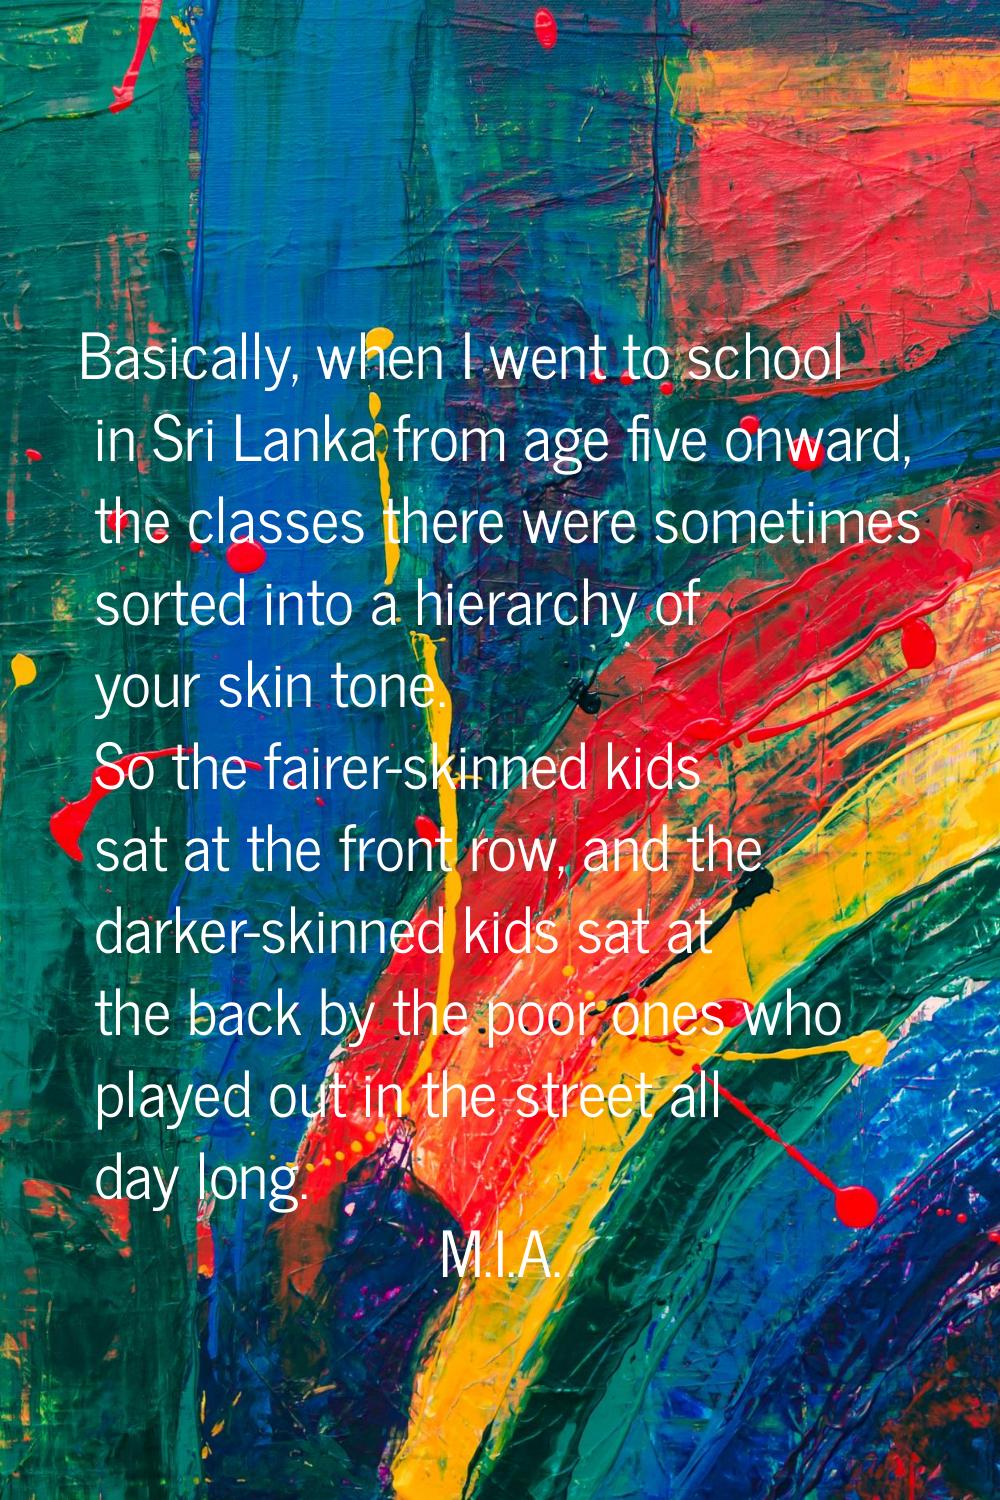 Basically, when I went to school in Sri Lanka from age five onward, the classes there were sometime